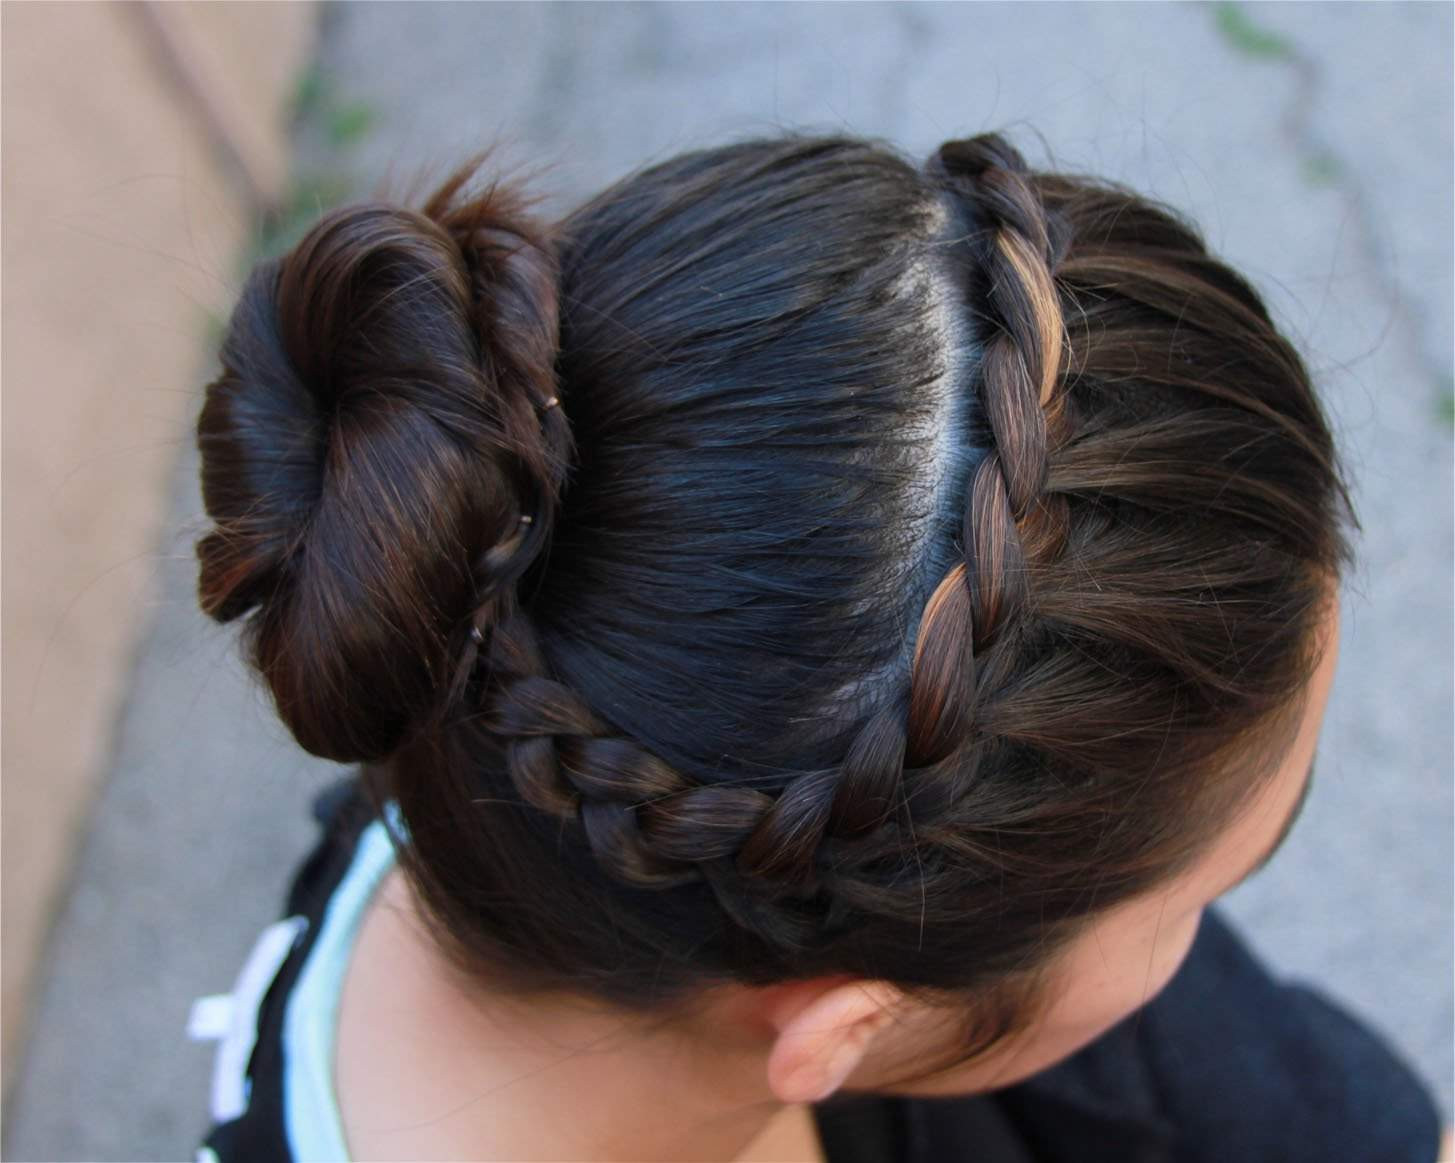 Cute Braid Updo Hairstyles
 Easy Buns and Braided Hairstyles